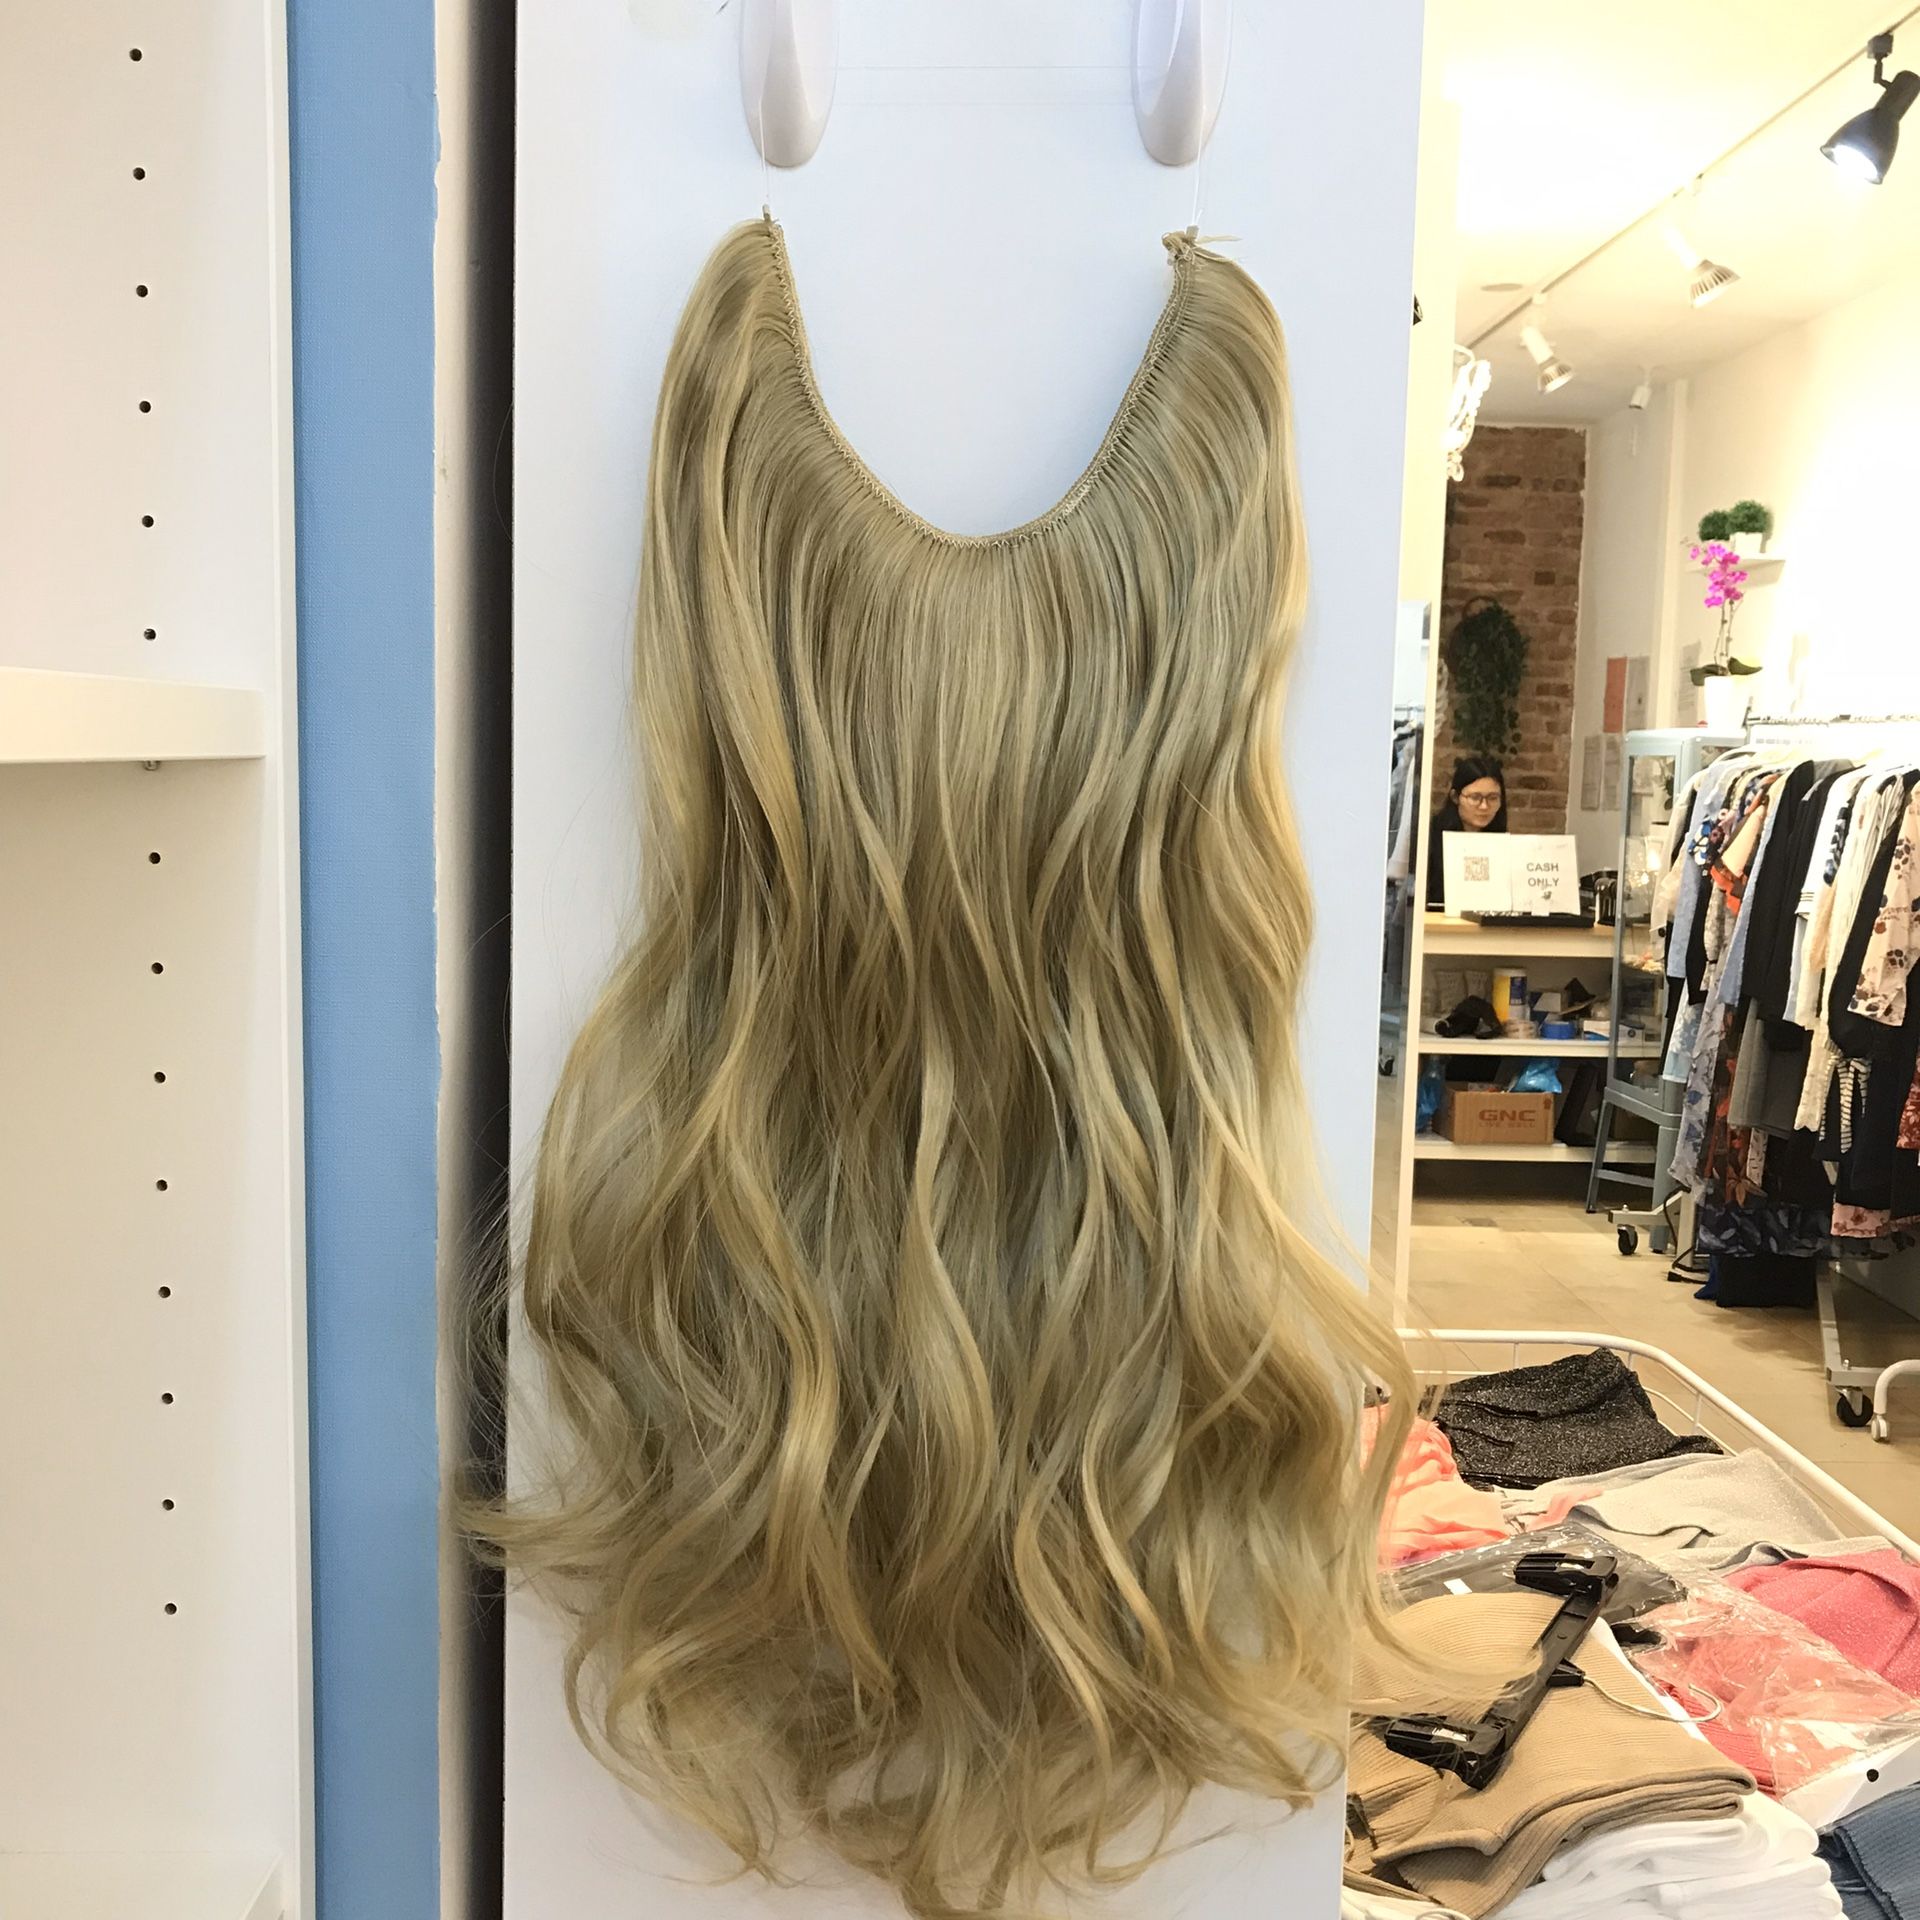 22” Fish line band halo hair extension